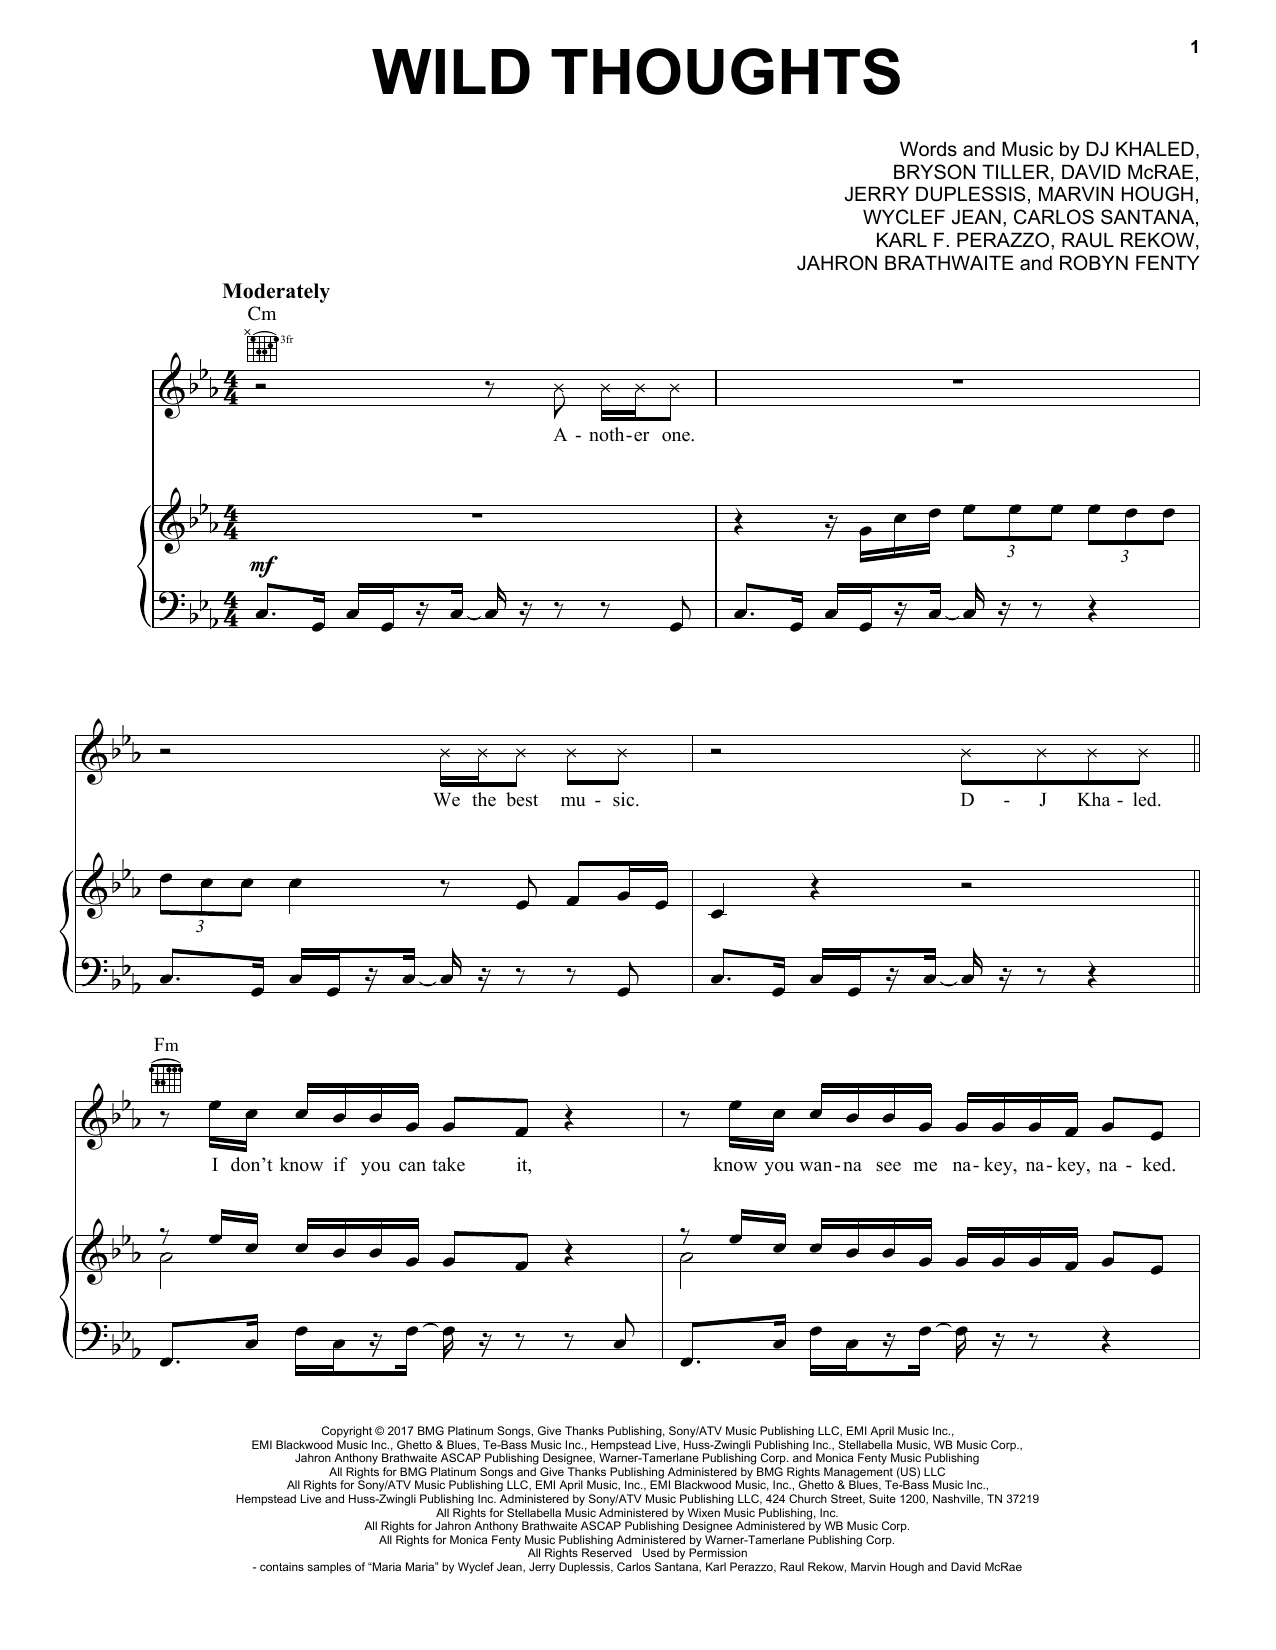 Wild Thoughts sheet music